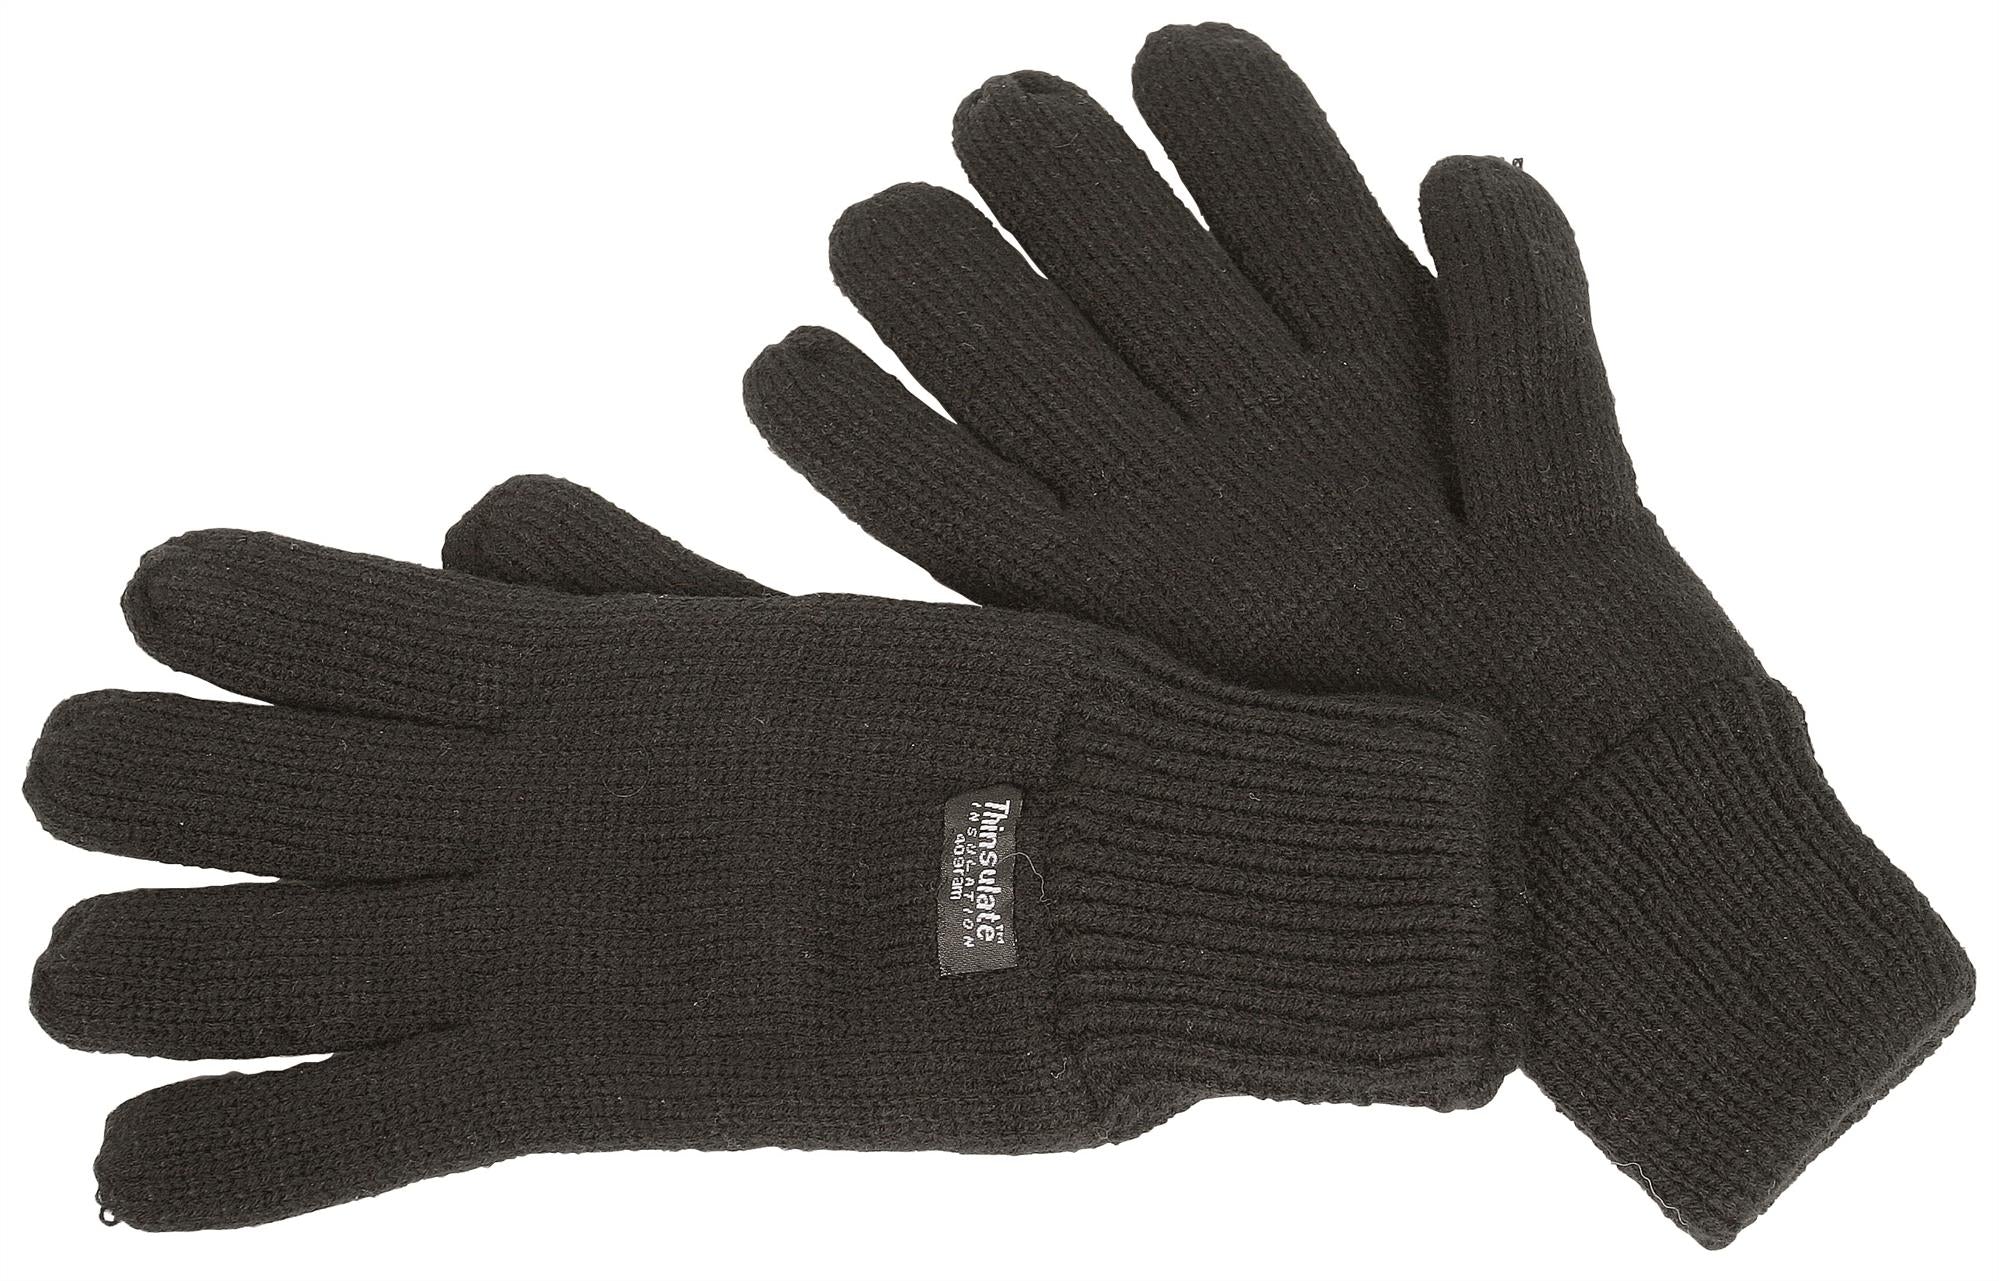 Fort Thinsulate thermal-lined black knitted winter glove #602